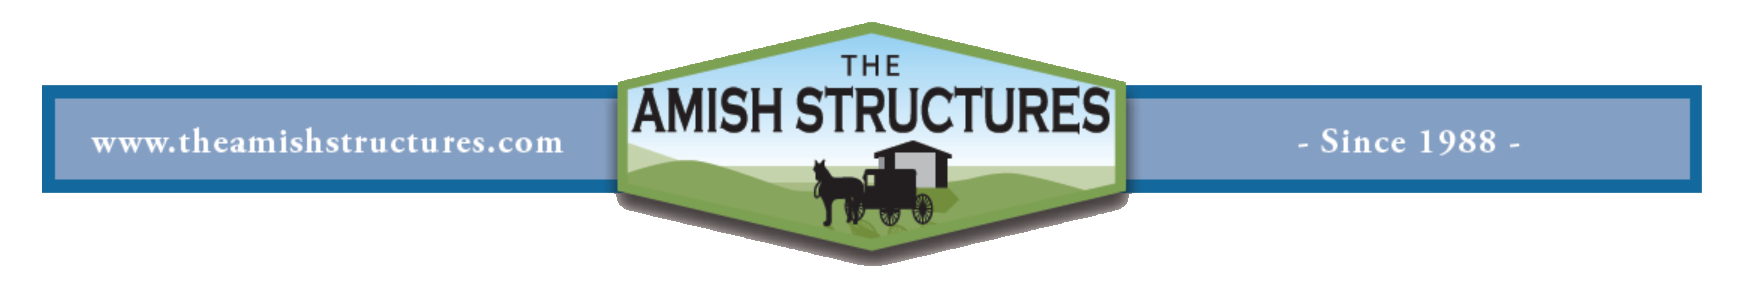 The Amish Structures